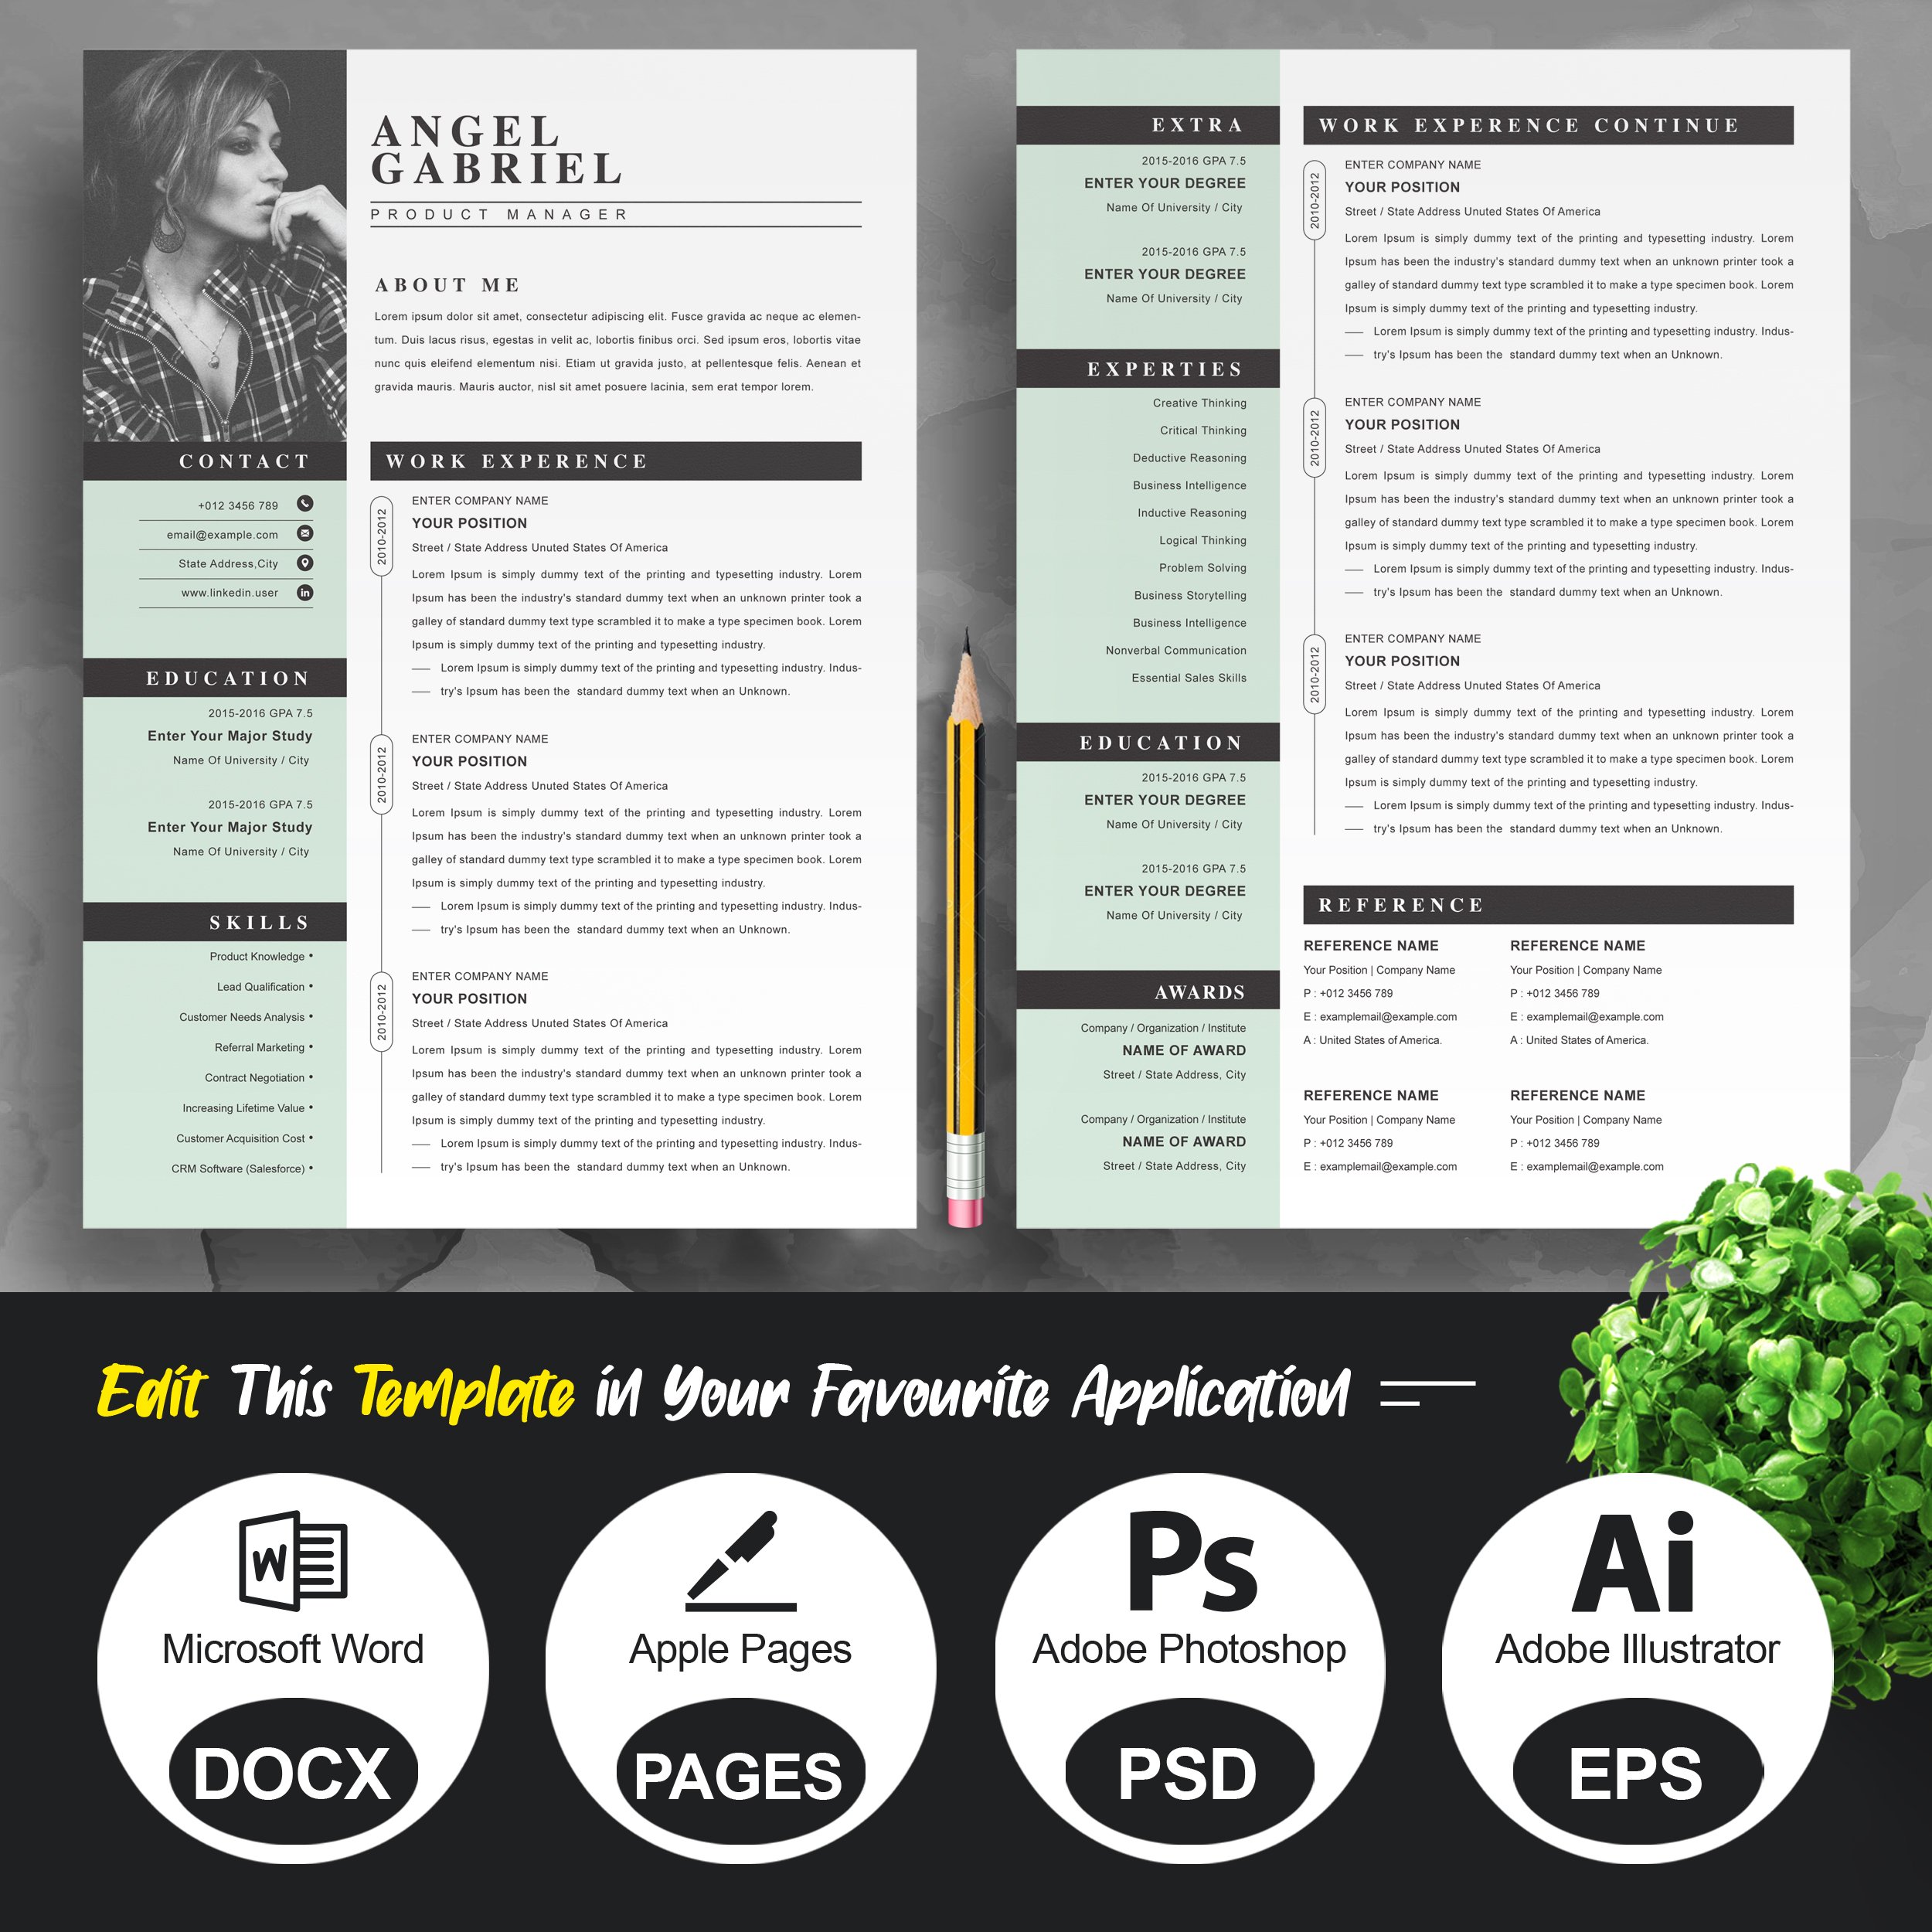 Product Manager Resume Template preview image.